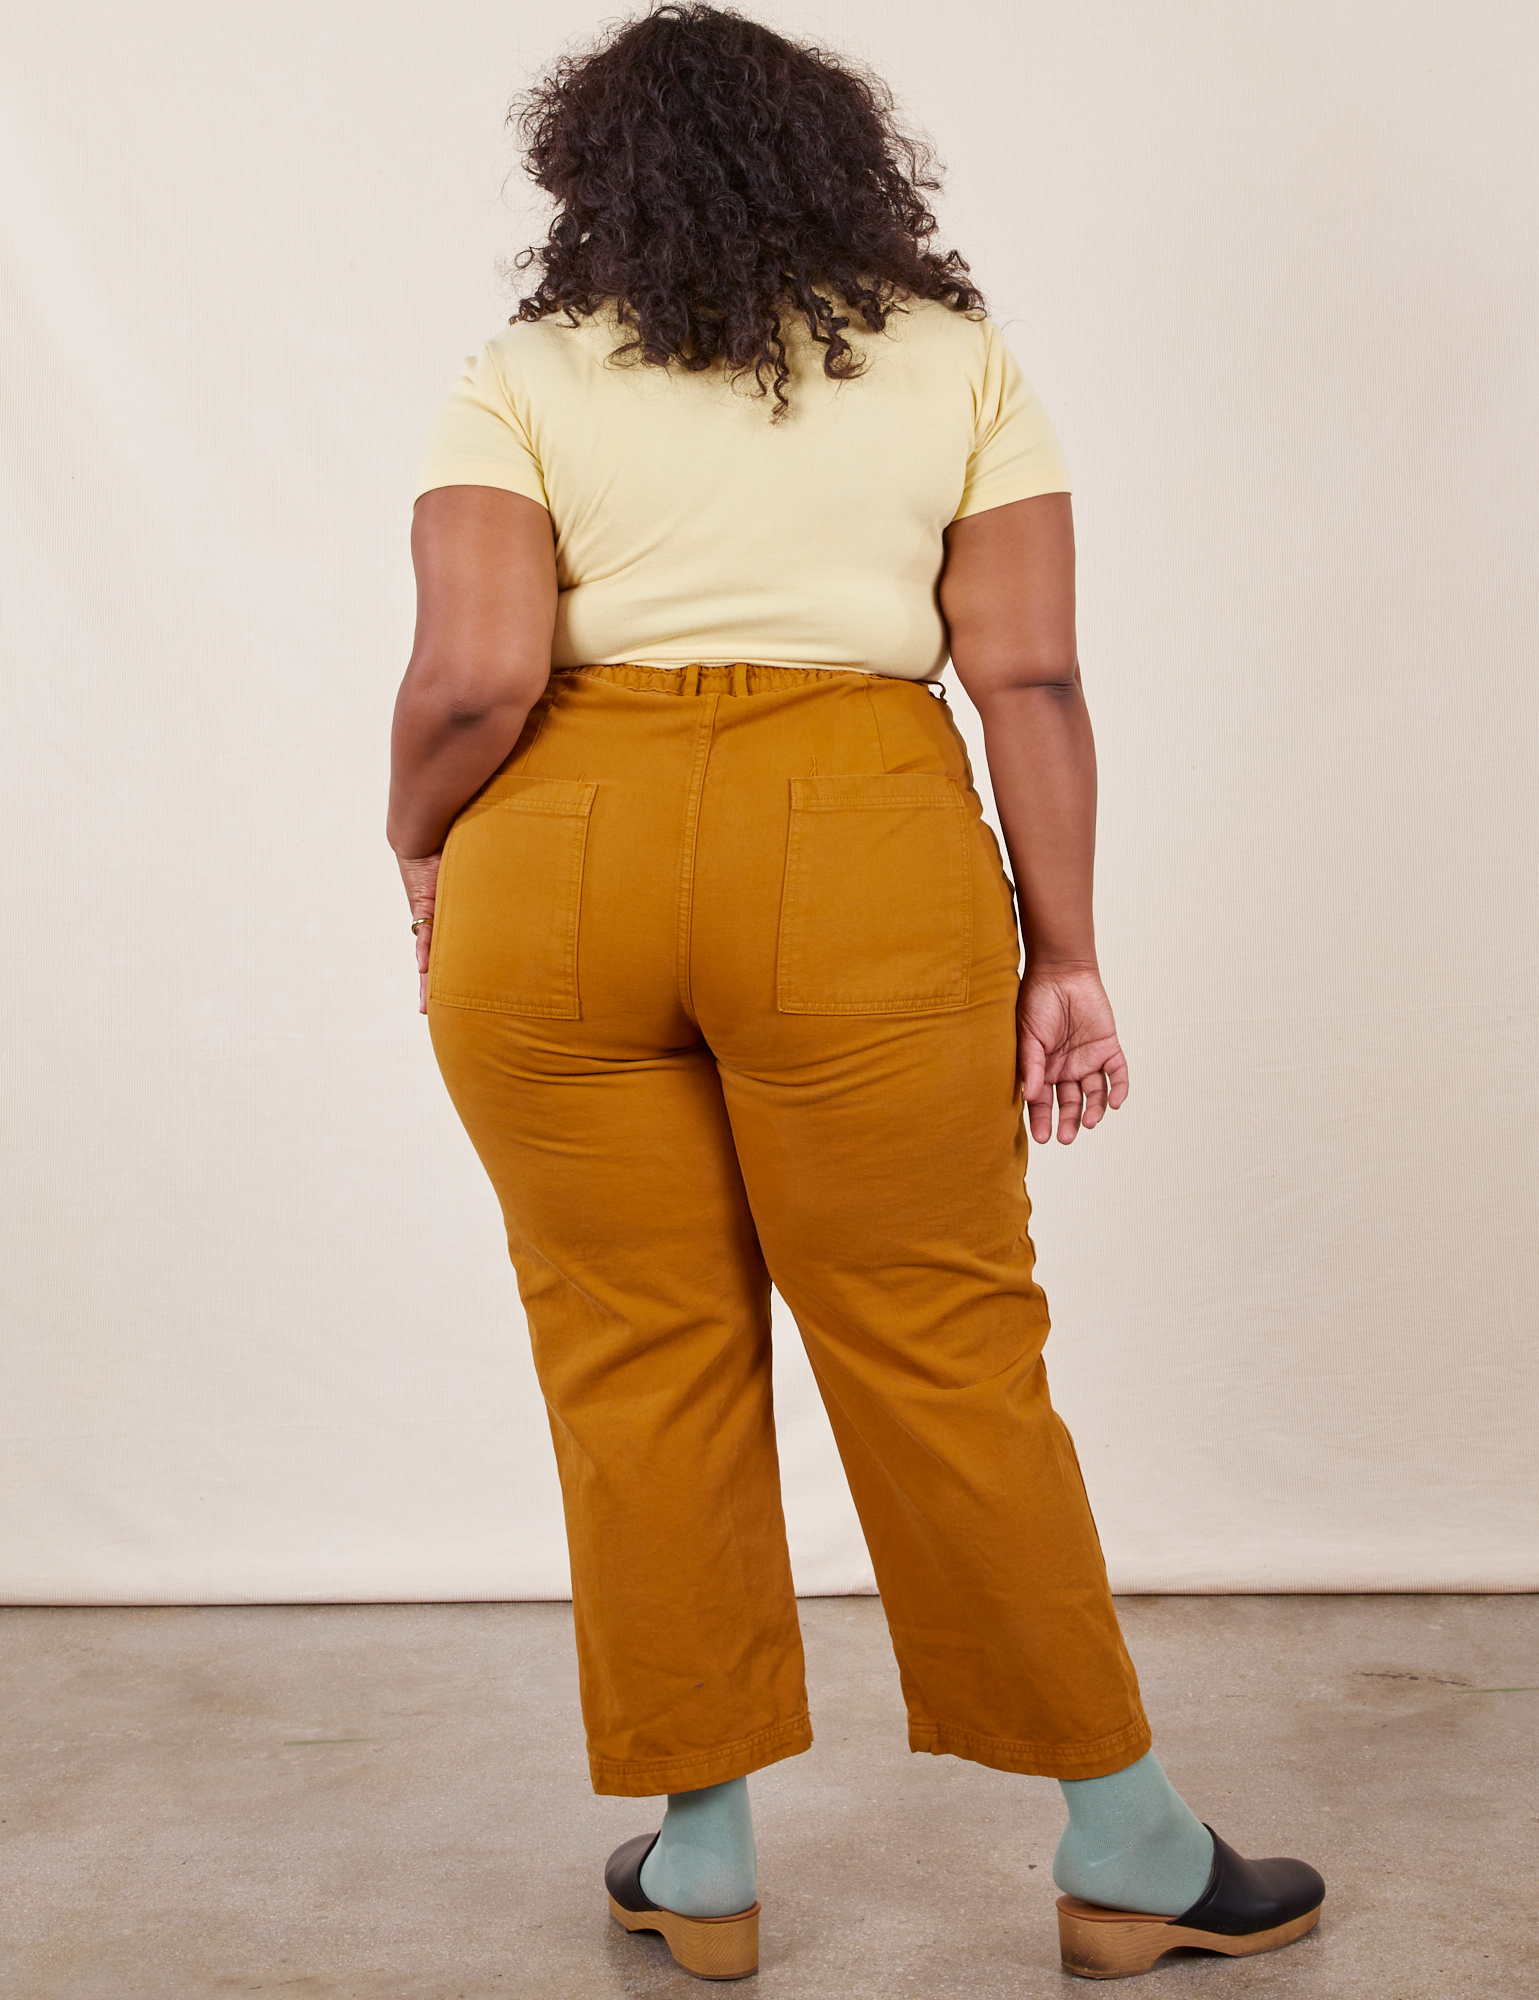 Work Pants in Spicy Mustard back view on Morgan wearing butter yellow Baby Tee